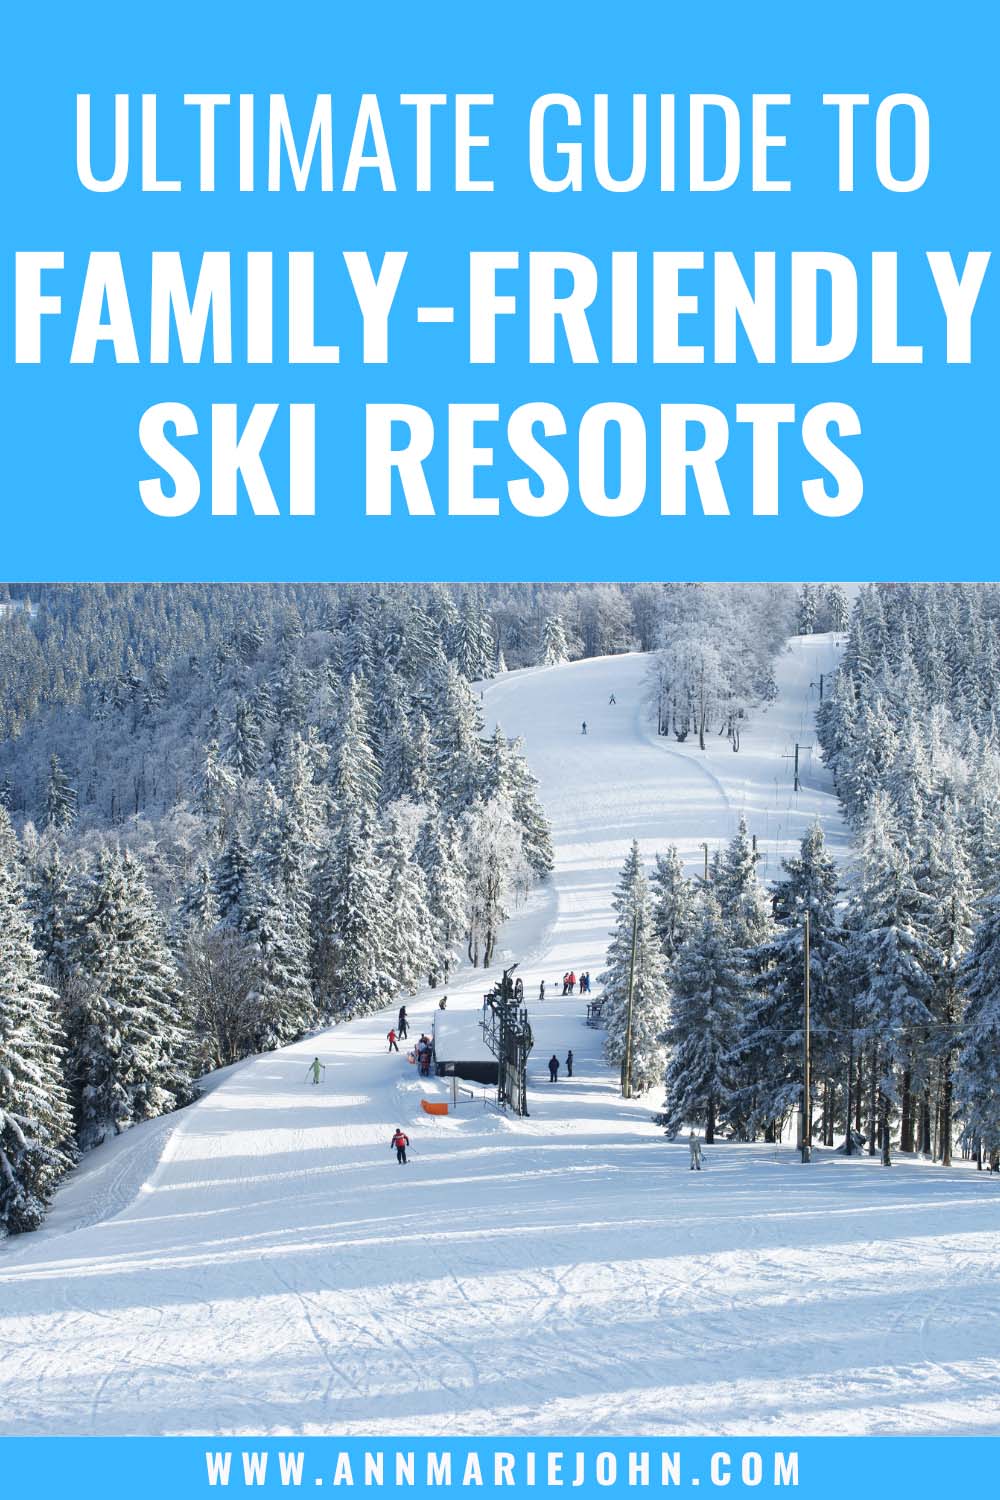 Ultimate Guide to Family-Friendly Ski Resorts